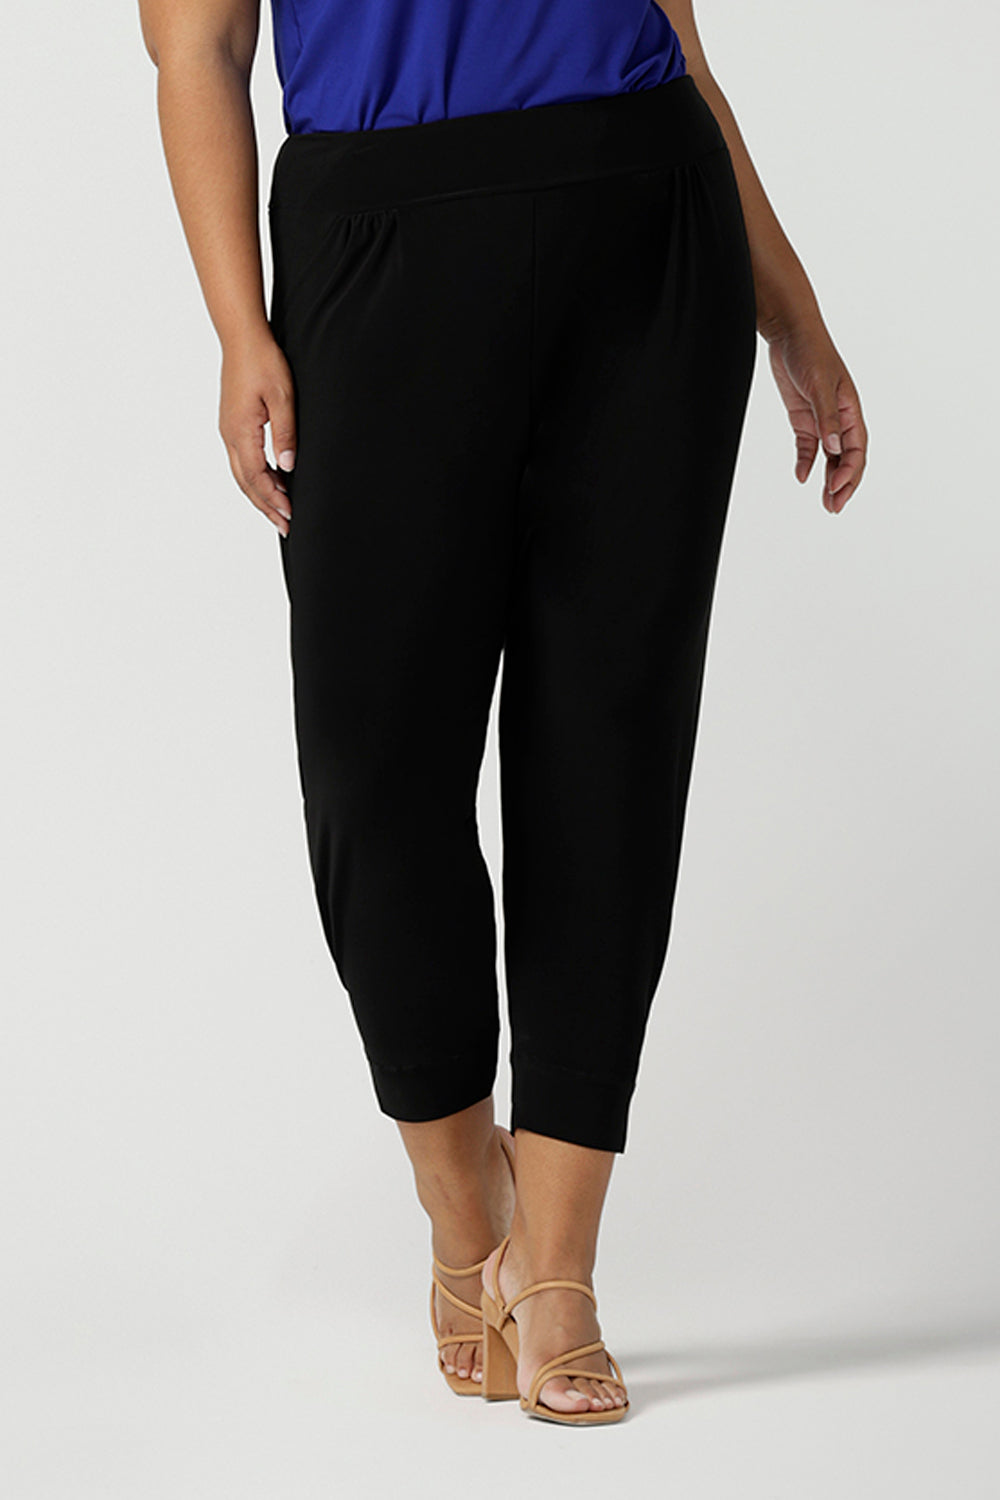 Great pants for travel, these dropped crotch, cropped leg, single seam black pants are made stretchy jersey for ultimate comfort. Australian made, shop these comfy navy pants for your travel and capsule wardrobe now!